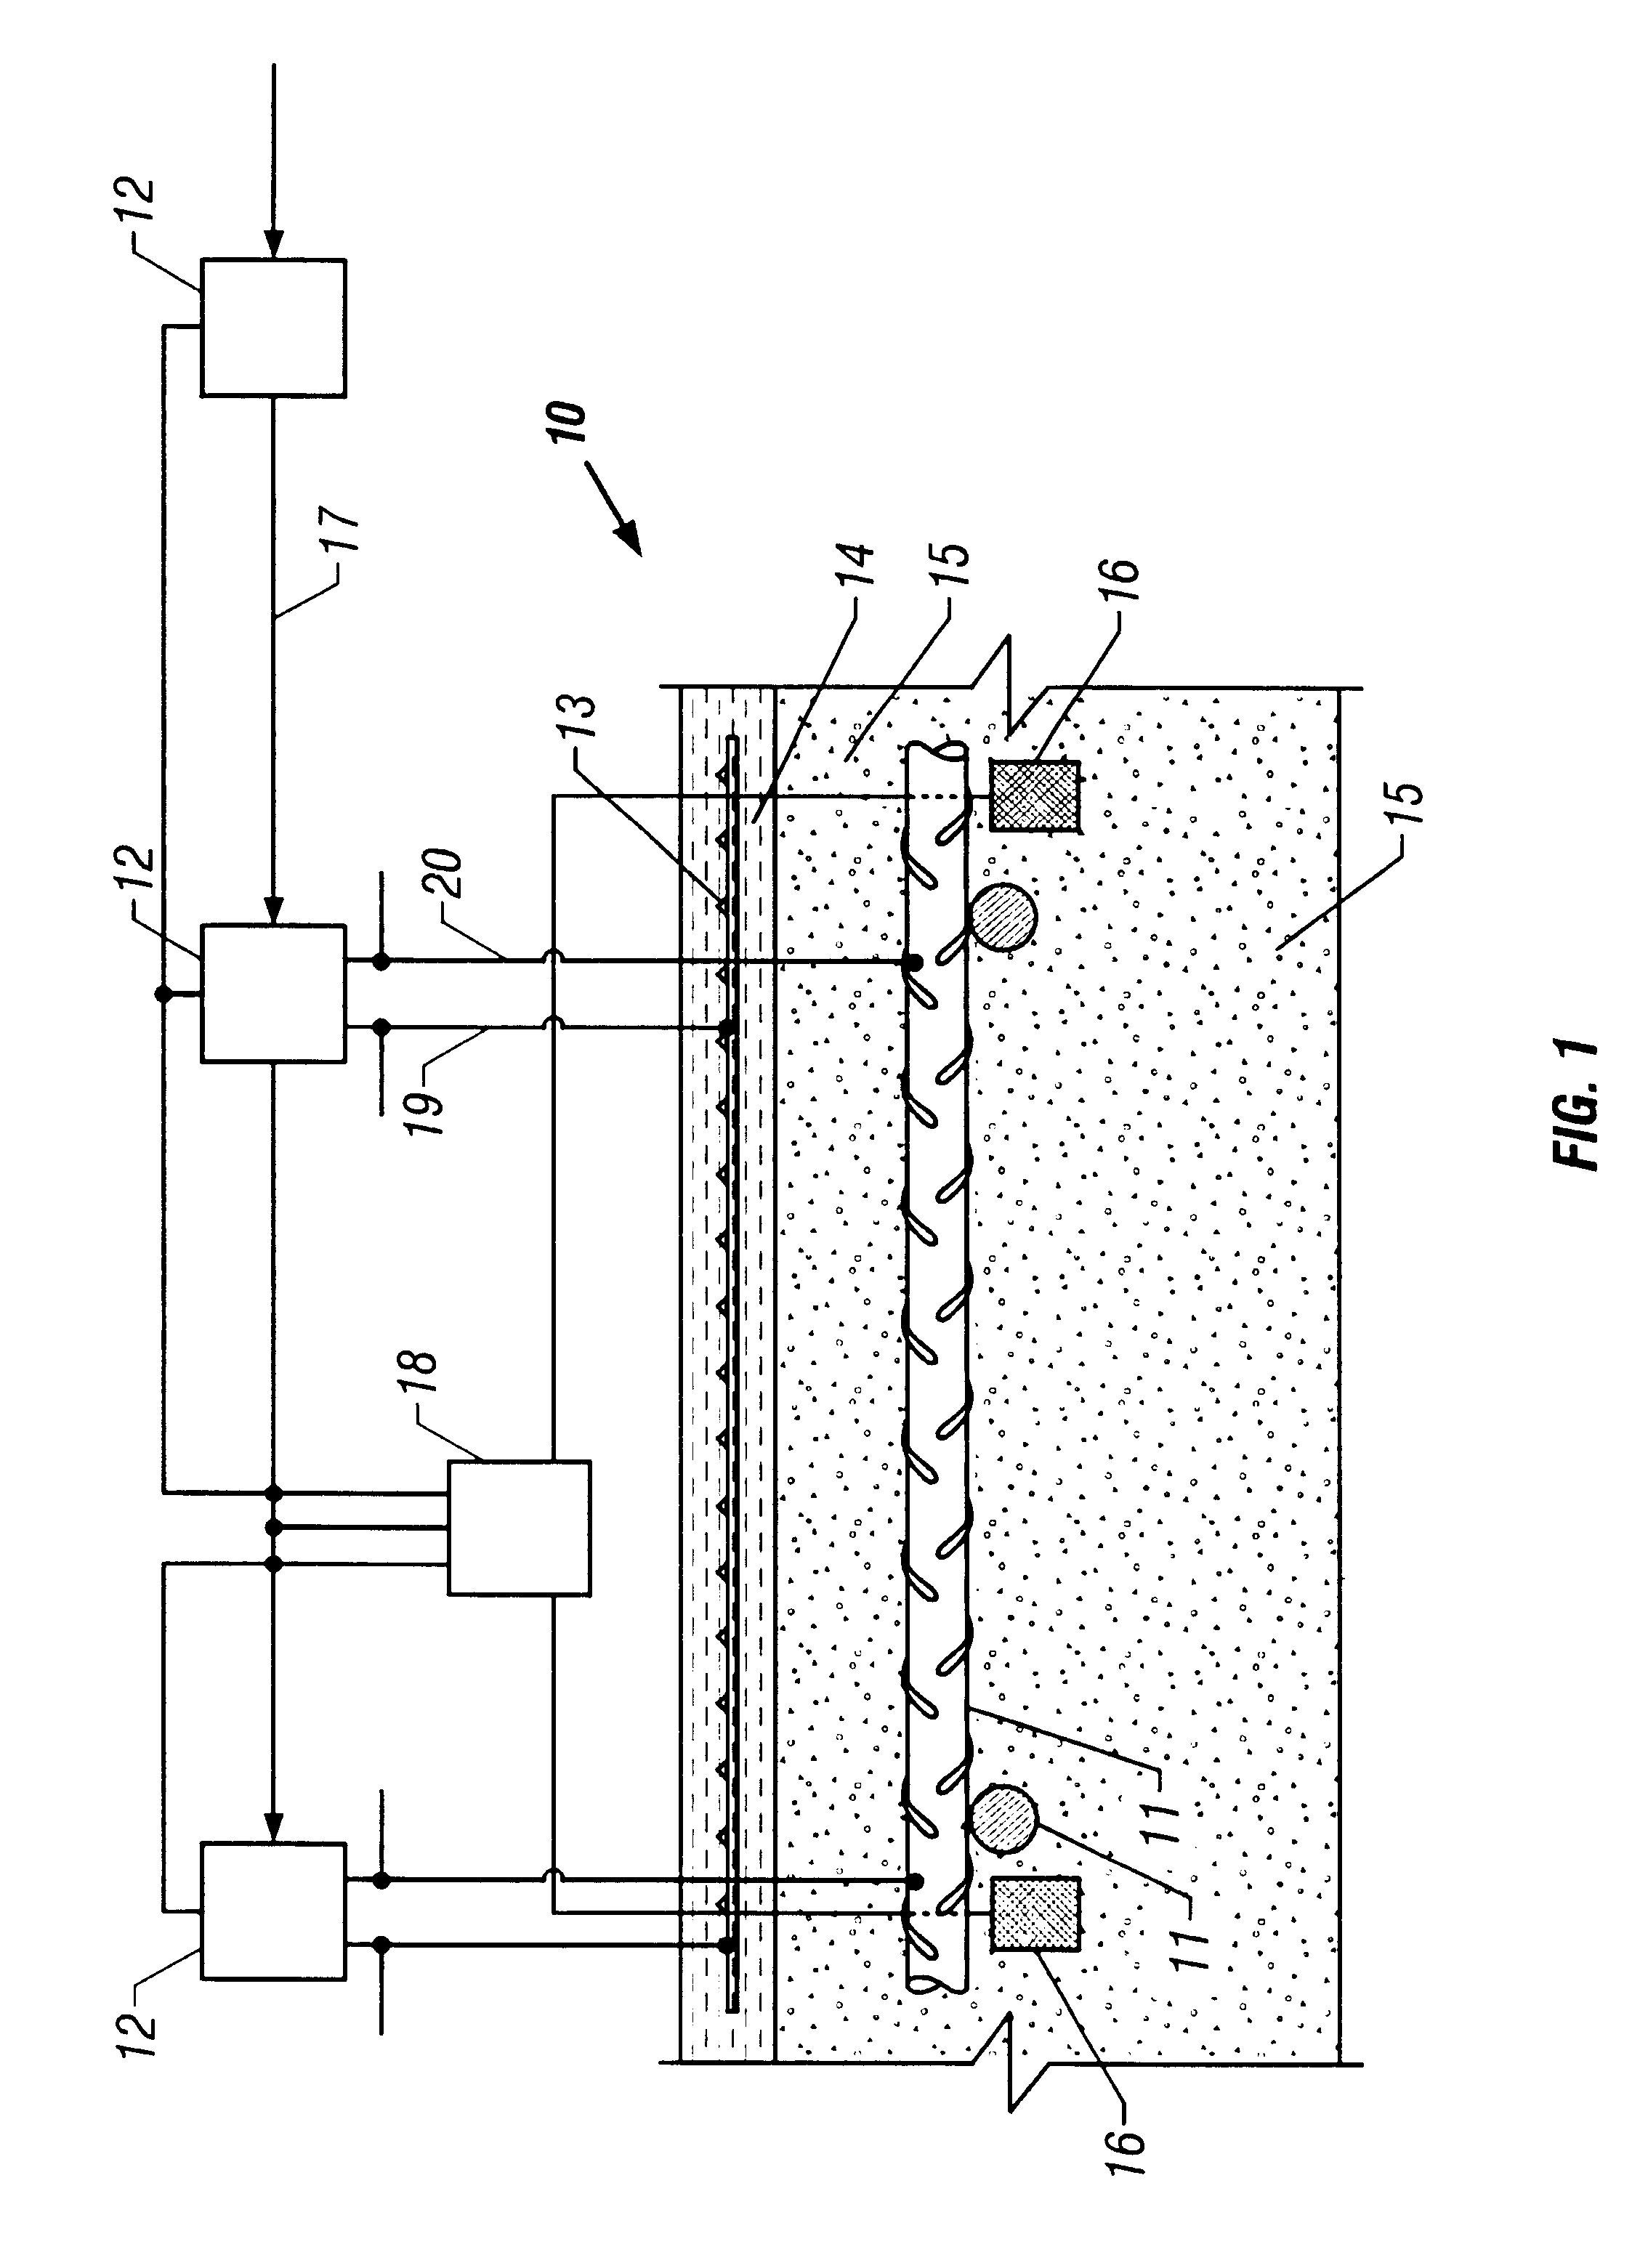 Method of treating corrosion in reinforced concrete structures by providing a uniform surface potential